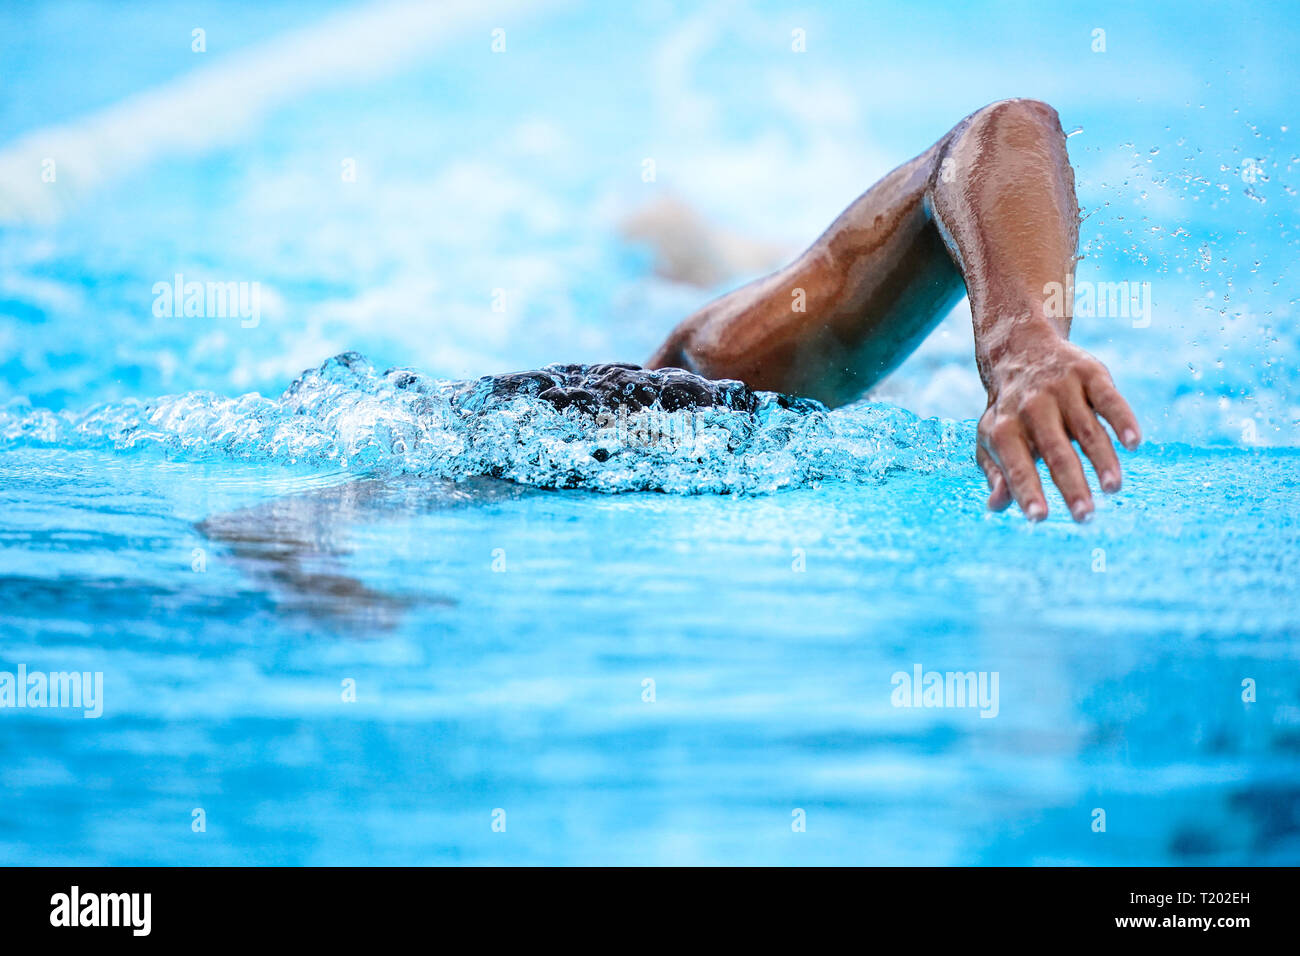 Details with a professional athlete swimming in an olympic swimming pool Stock Photo